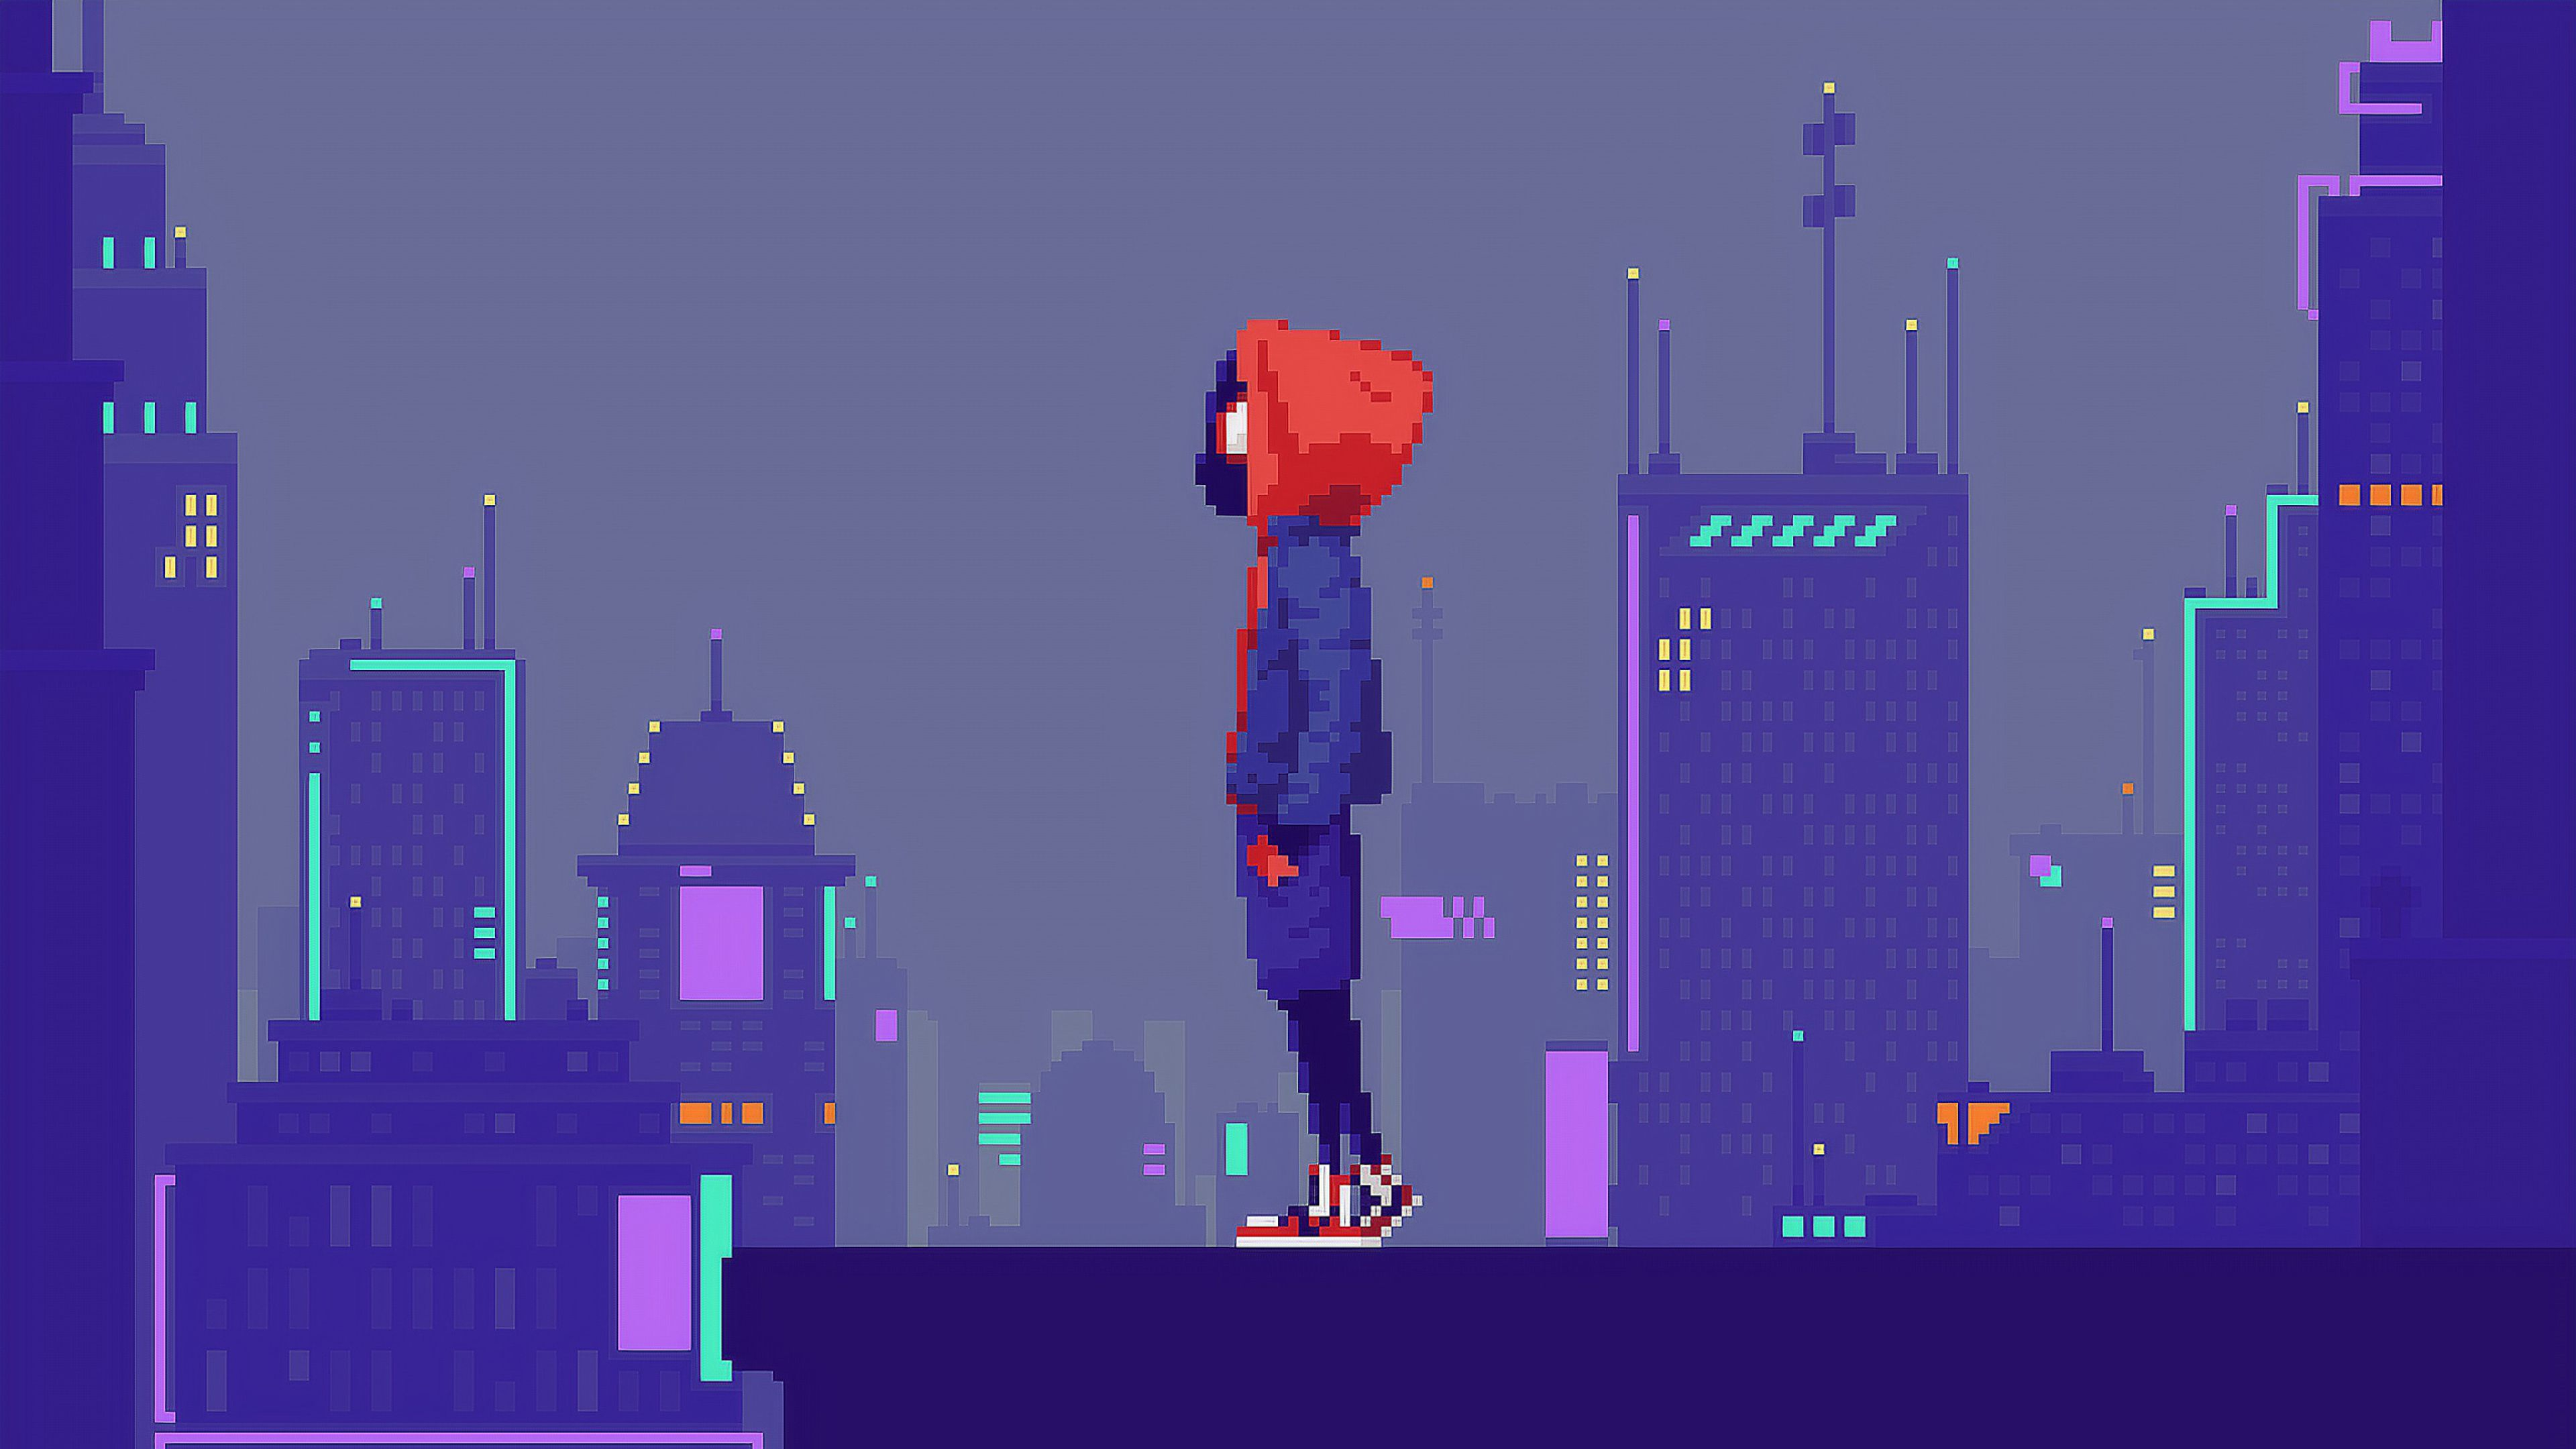 3840x2160 Into The Spider-Verse pixel art (3840 x 2160) : r/wallpapers